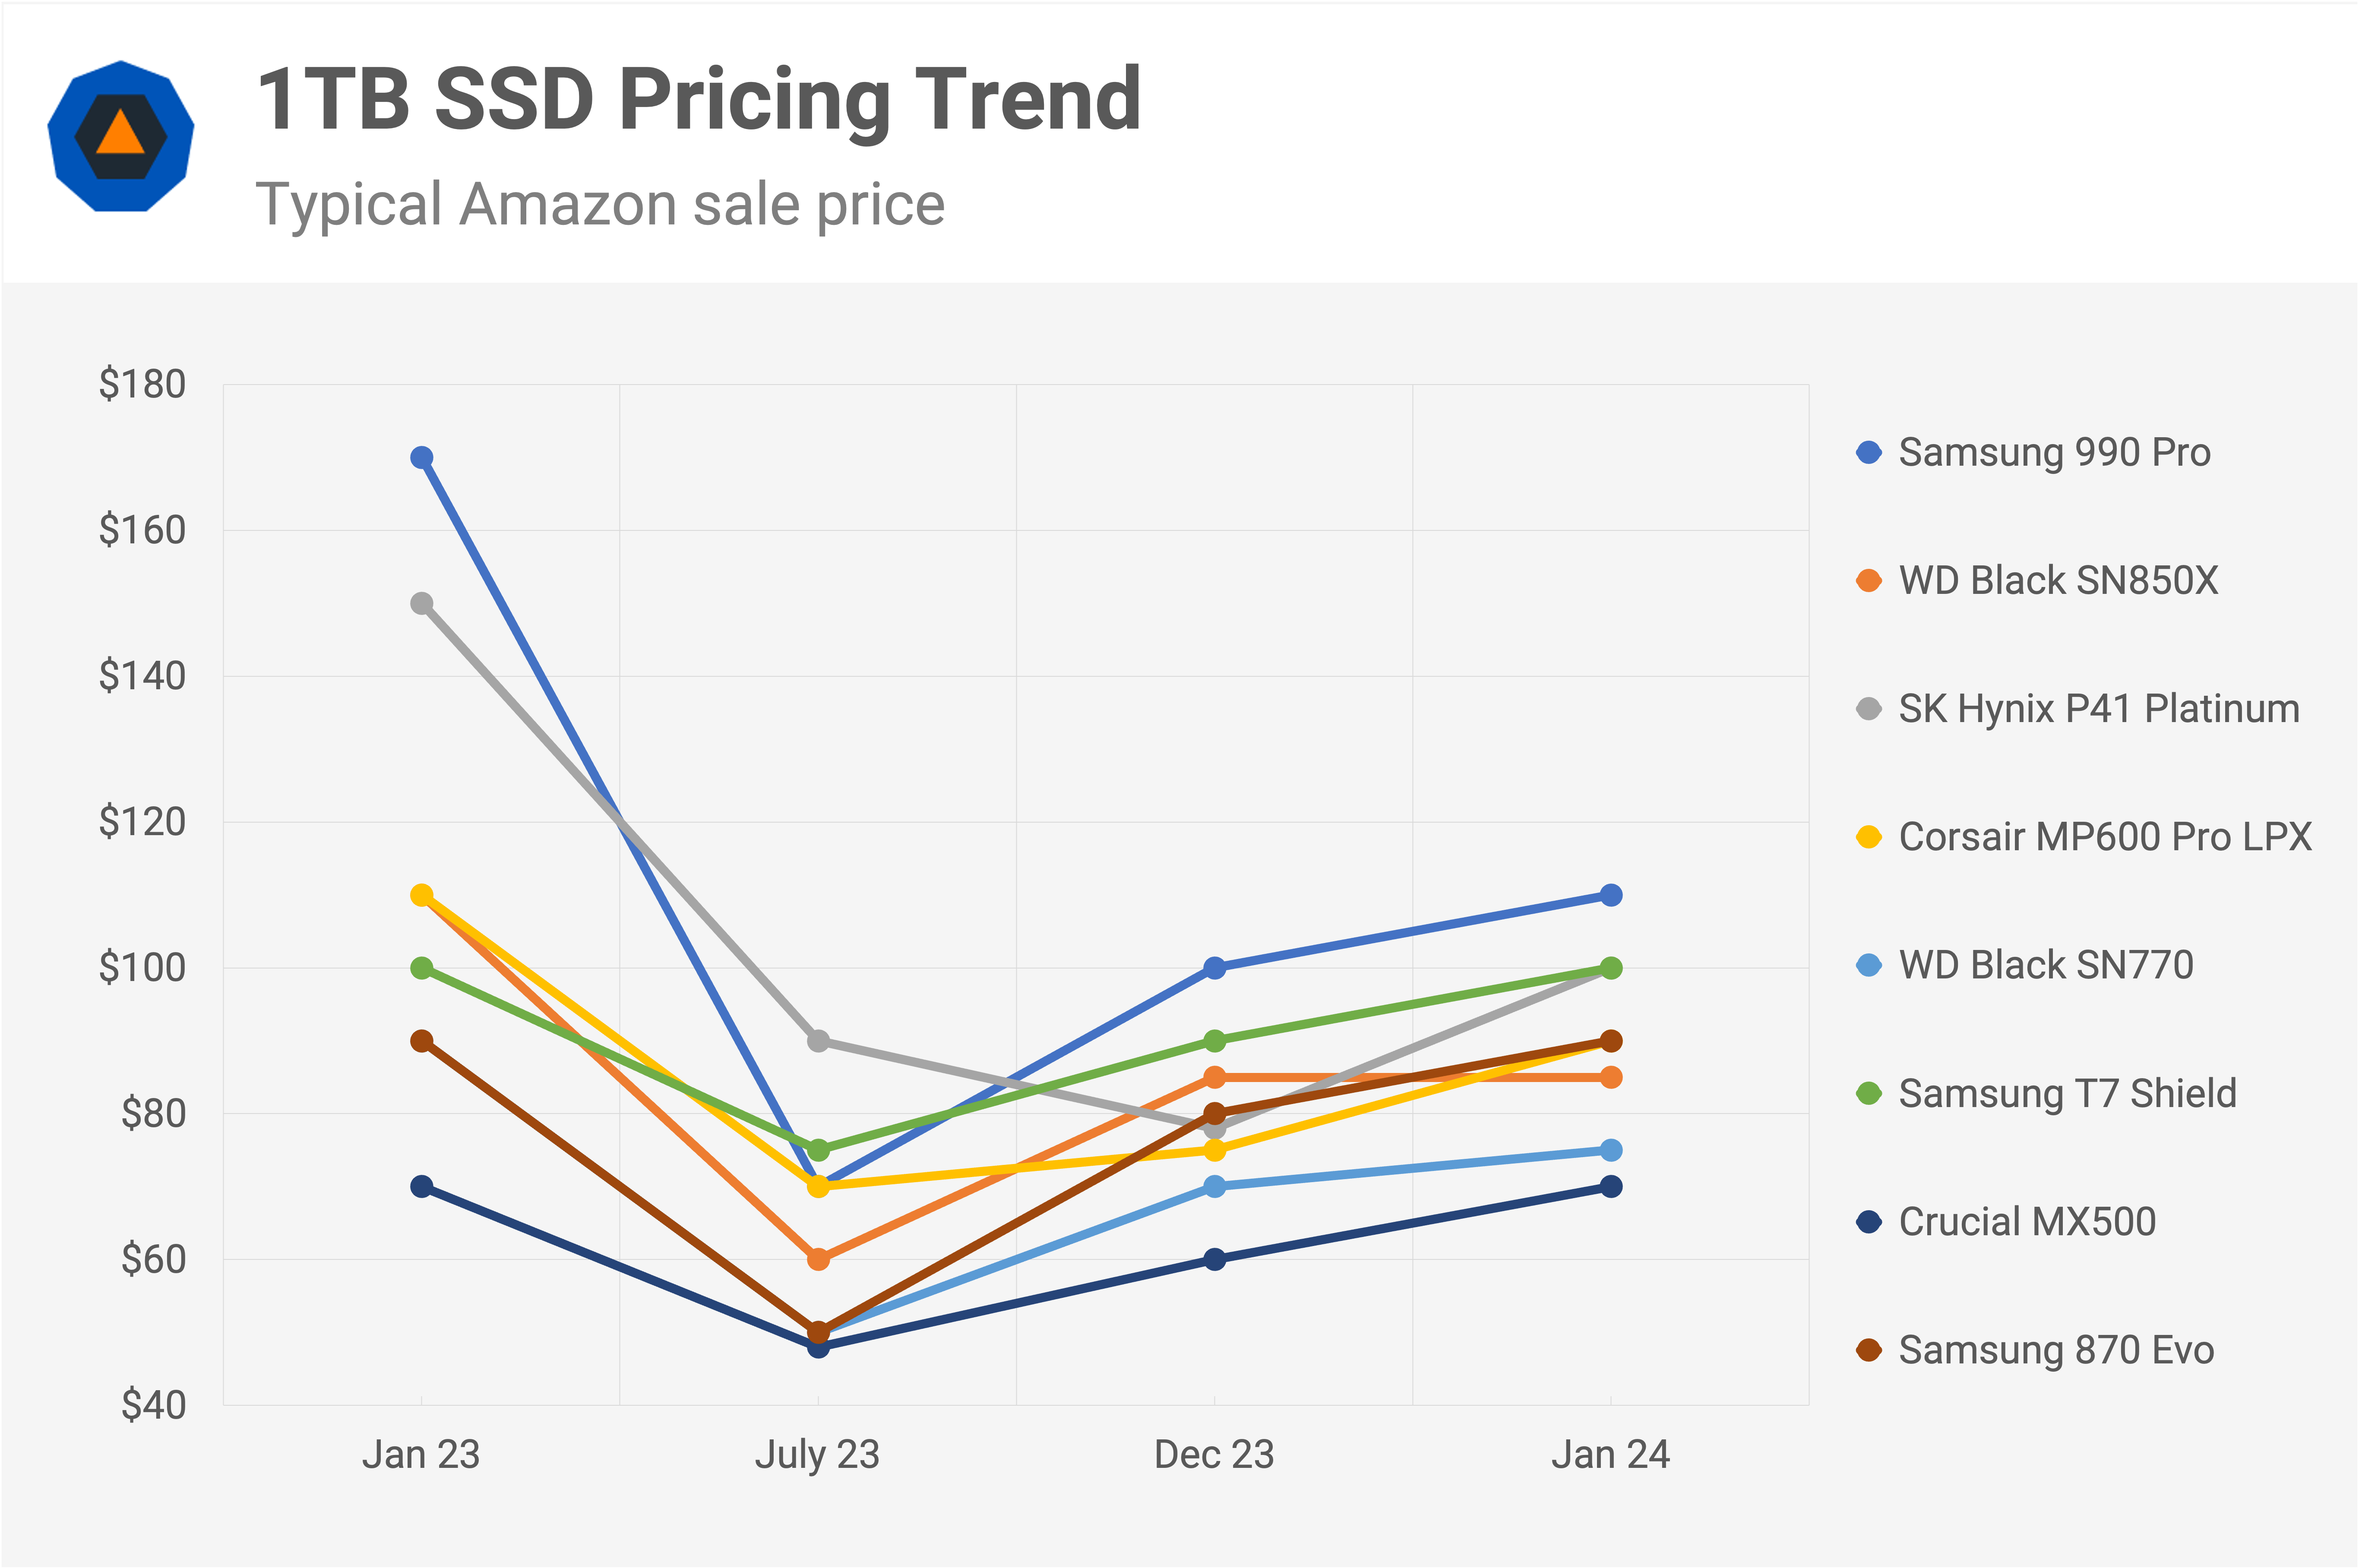 Bad News, SSDs Are Getting More Expensive